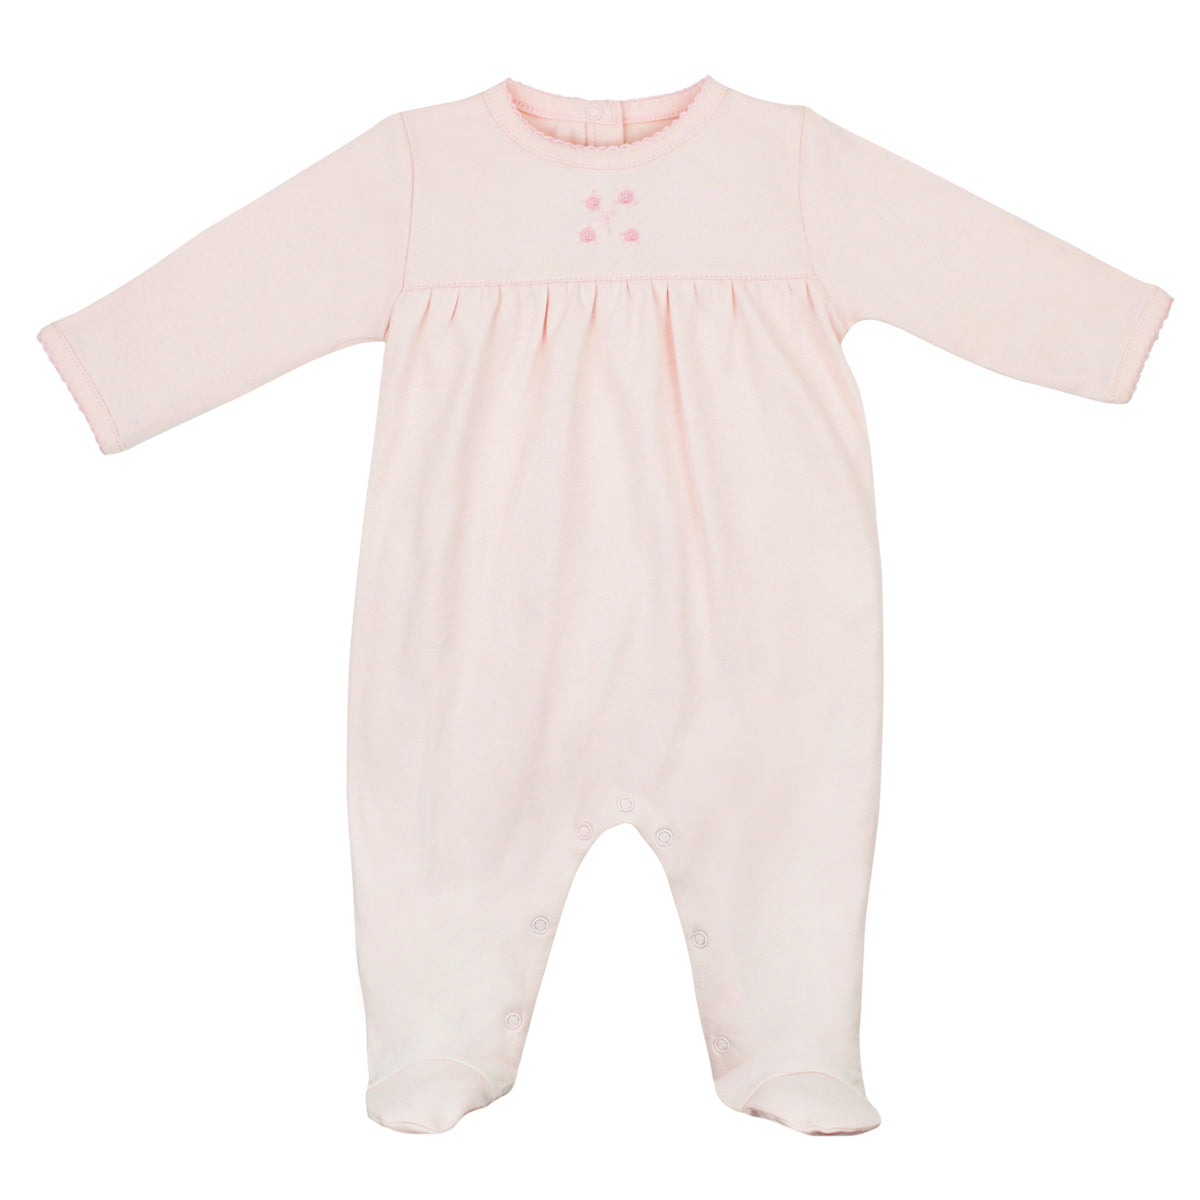 Roses embroidery Footie | Baby Girl